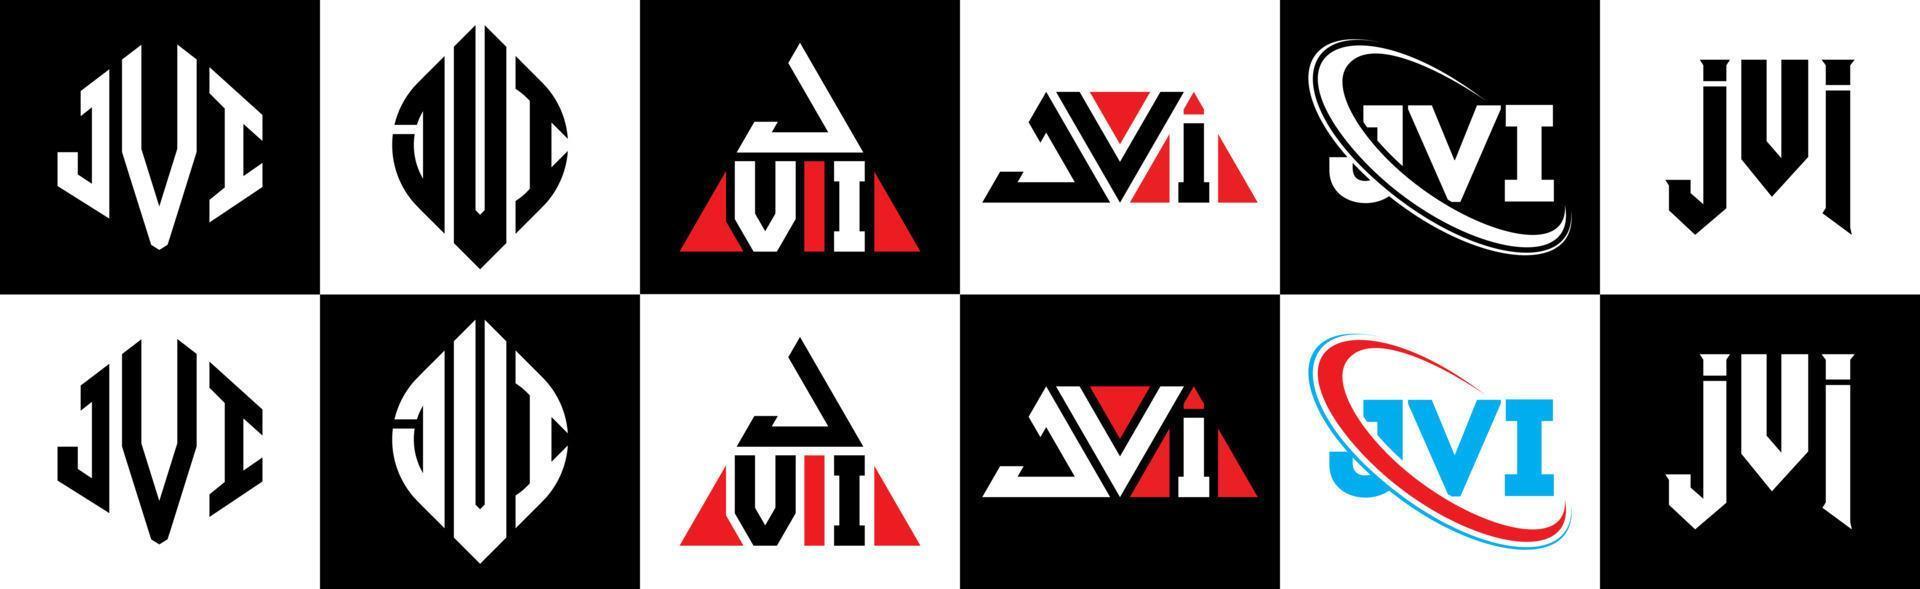 JVI letter logo design in six style. JVI polygon, circle, triangle, hexagon, flat and simple style with black and white color variation letter logo set in one artboard. JVI minimalist and classic logo vector